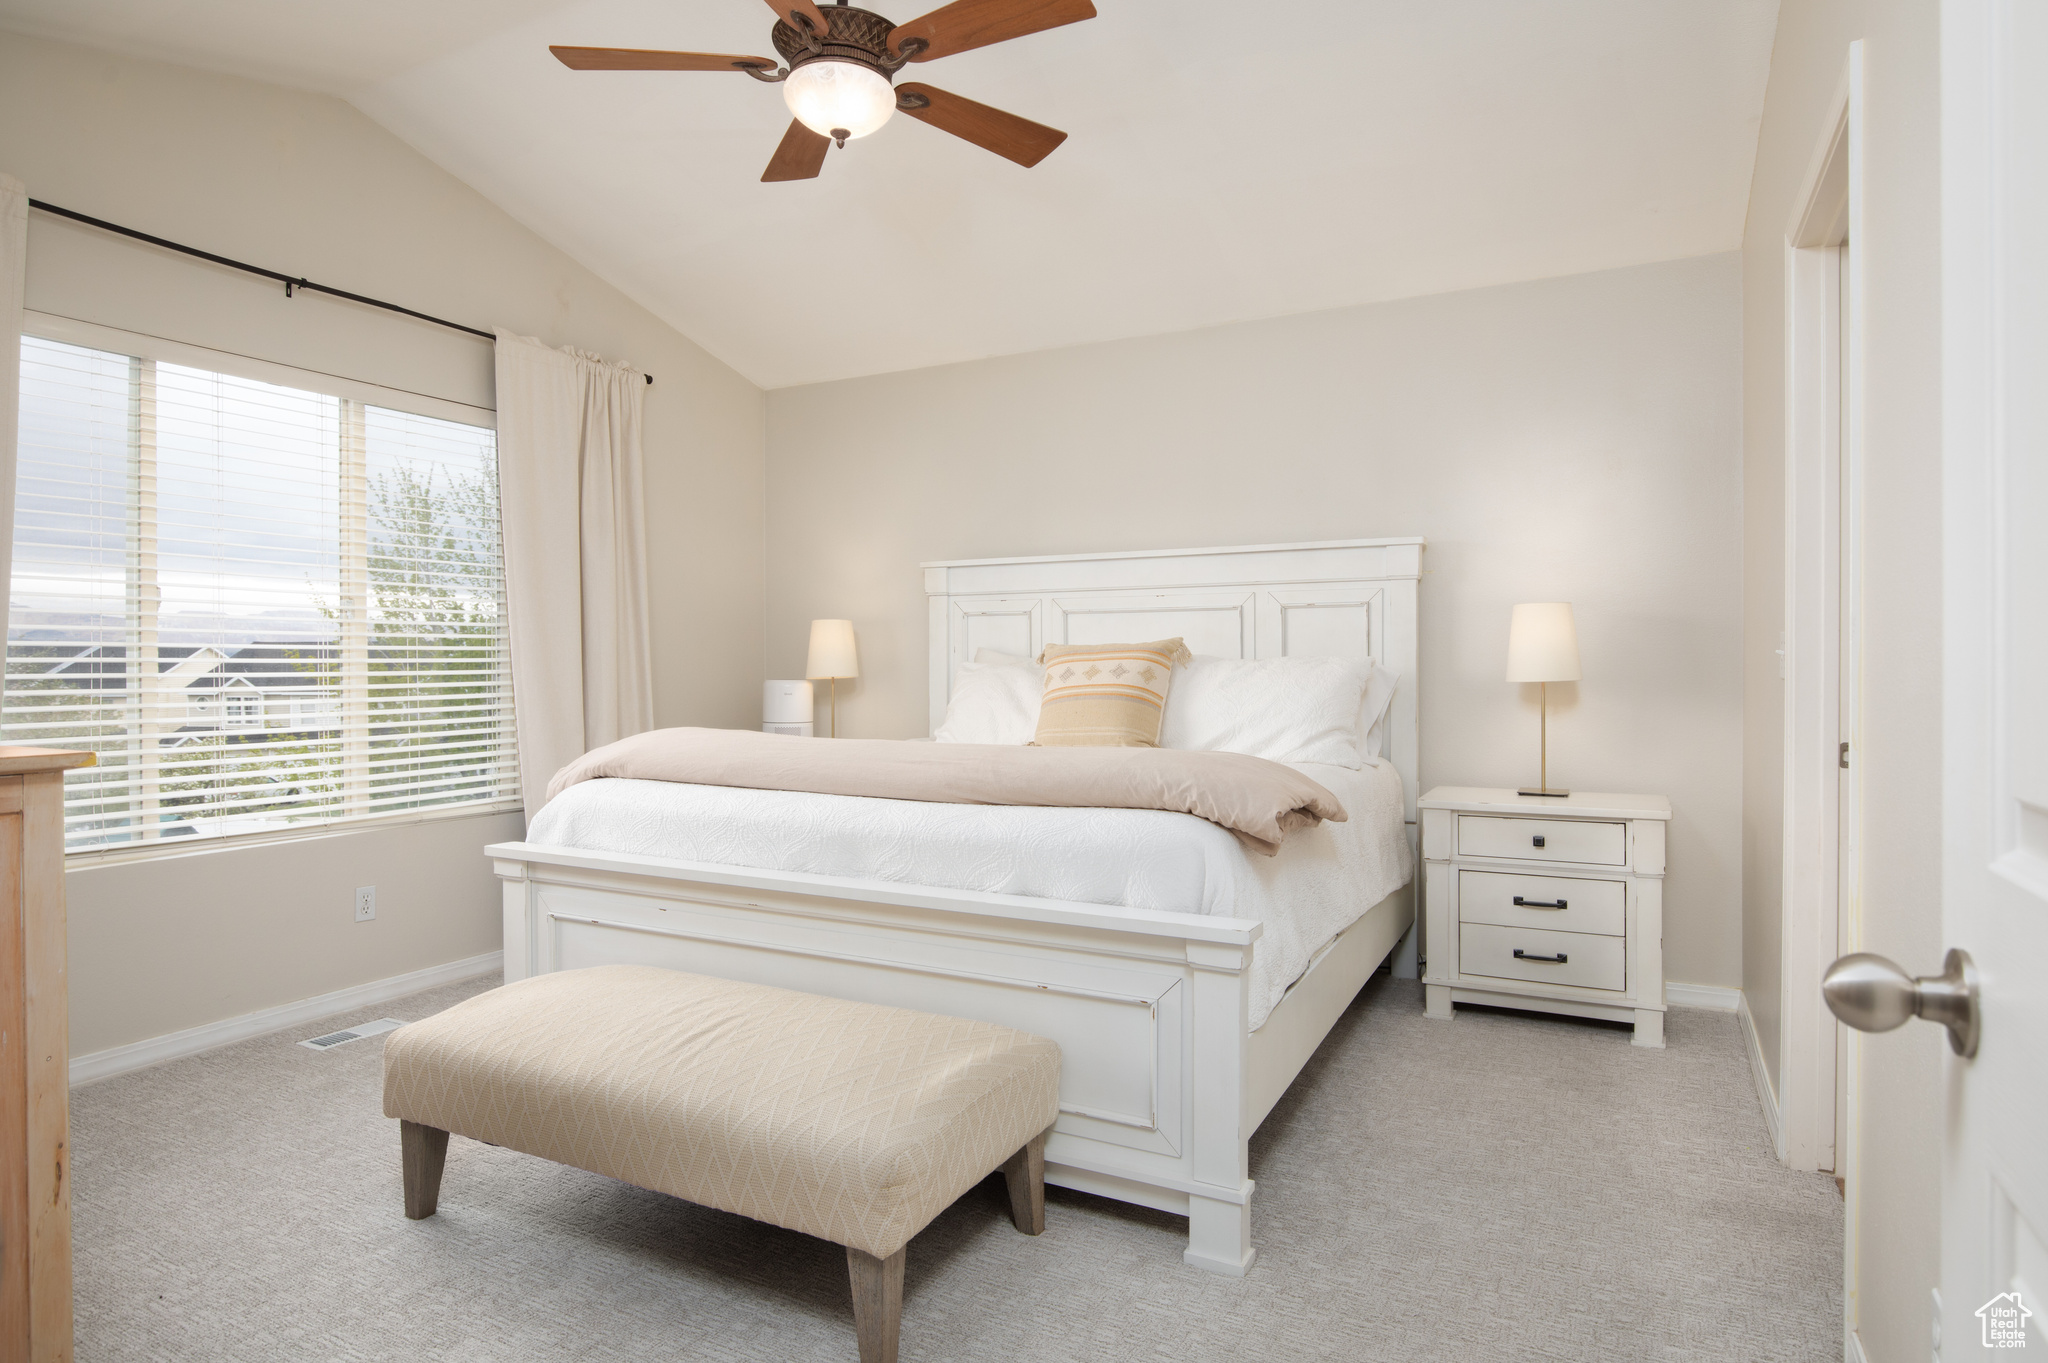 Bedroom featuring light colored carpet, vaulted ceiling, and ceiling fan